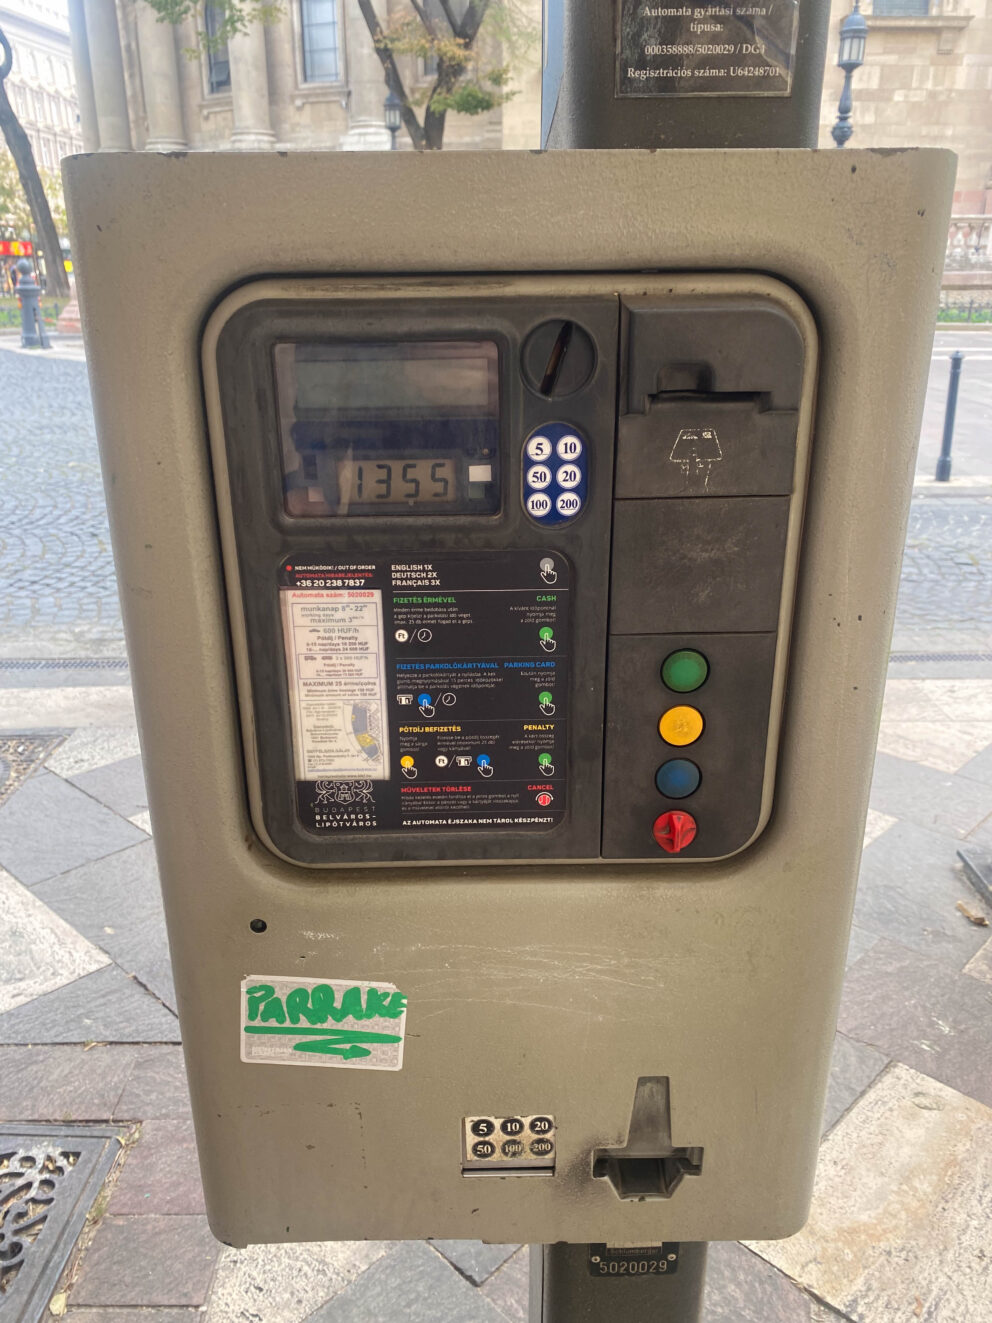 Parking meter in 5th district (downtown)